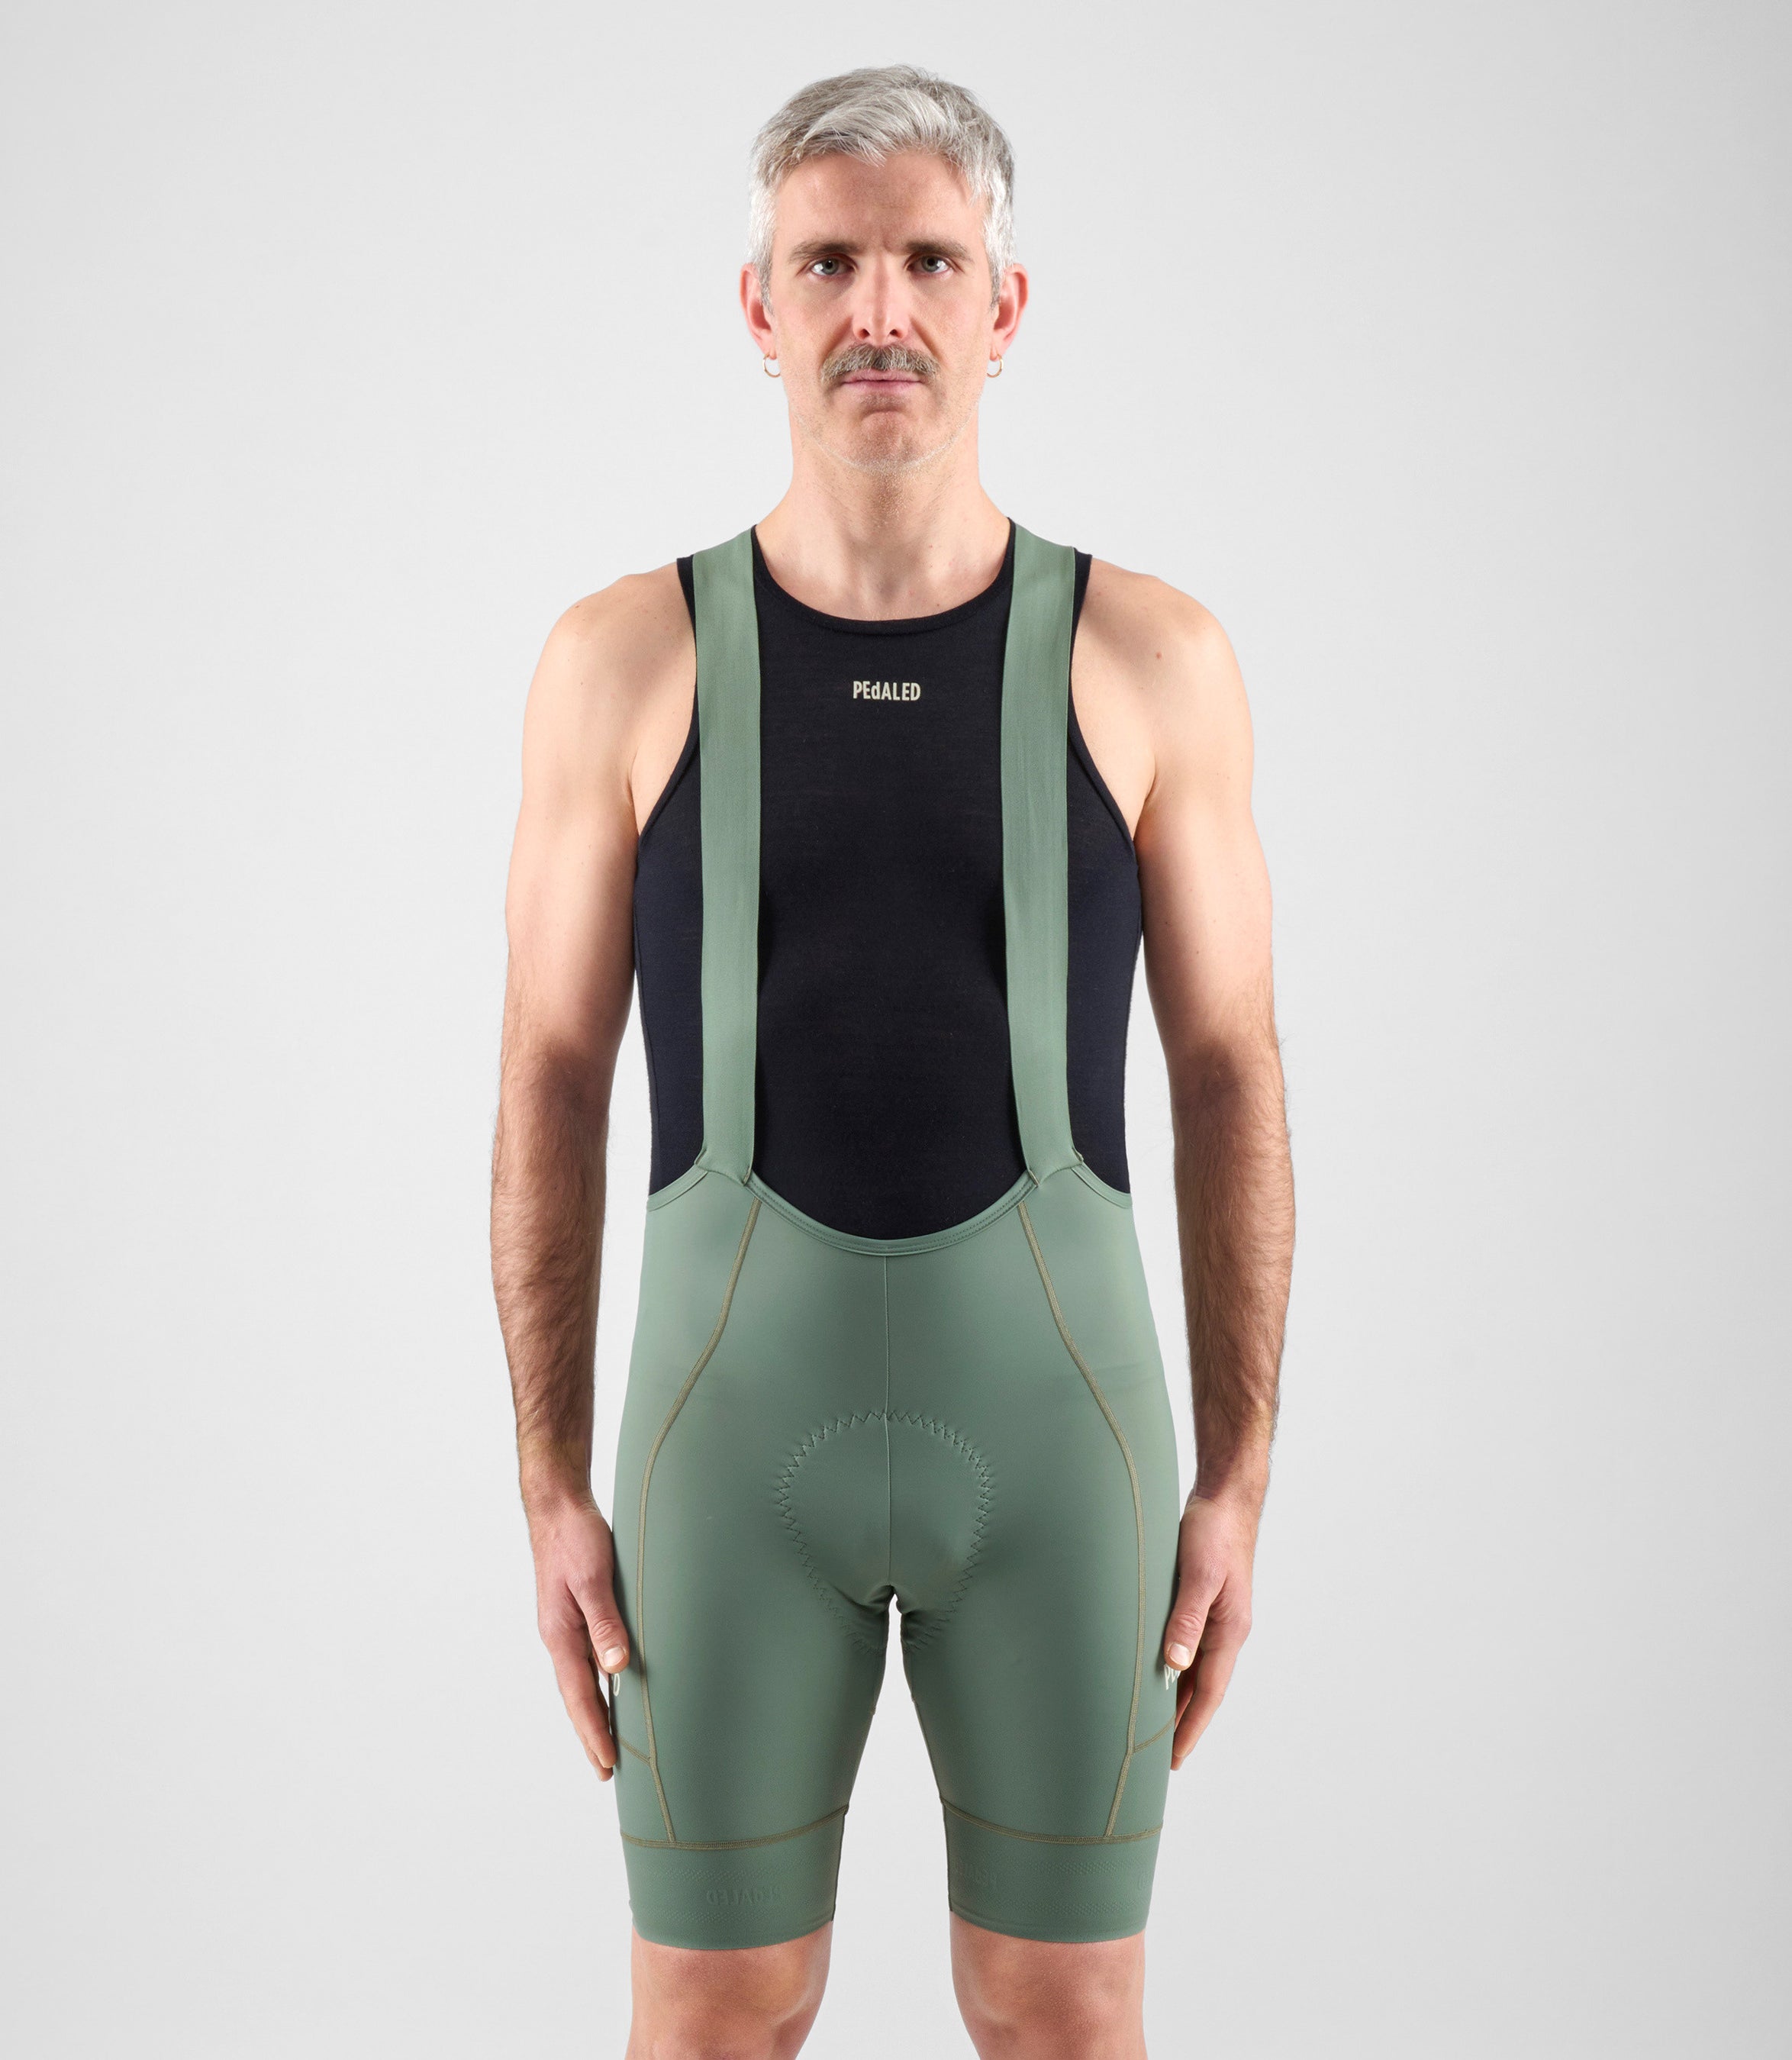 24SBBEL11PE_3_men cycling bibshorts element green total body front pedaled